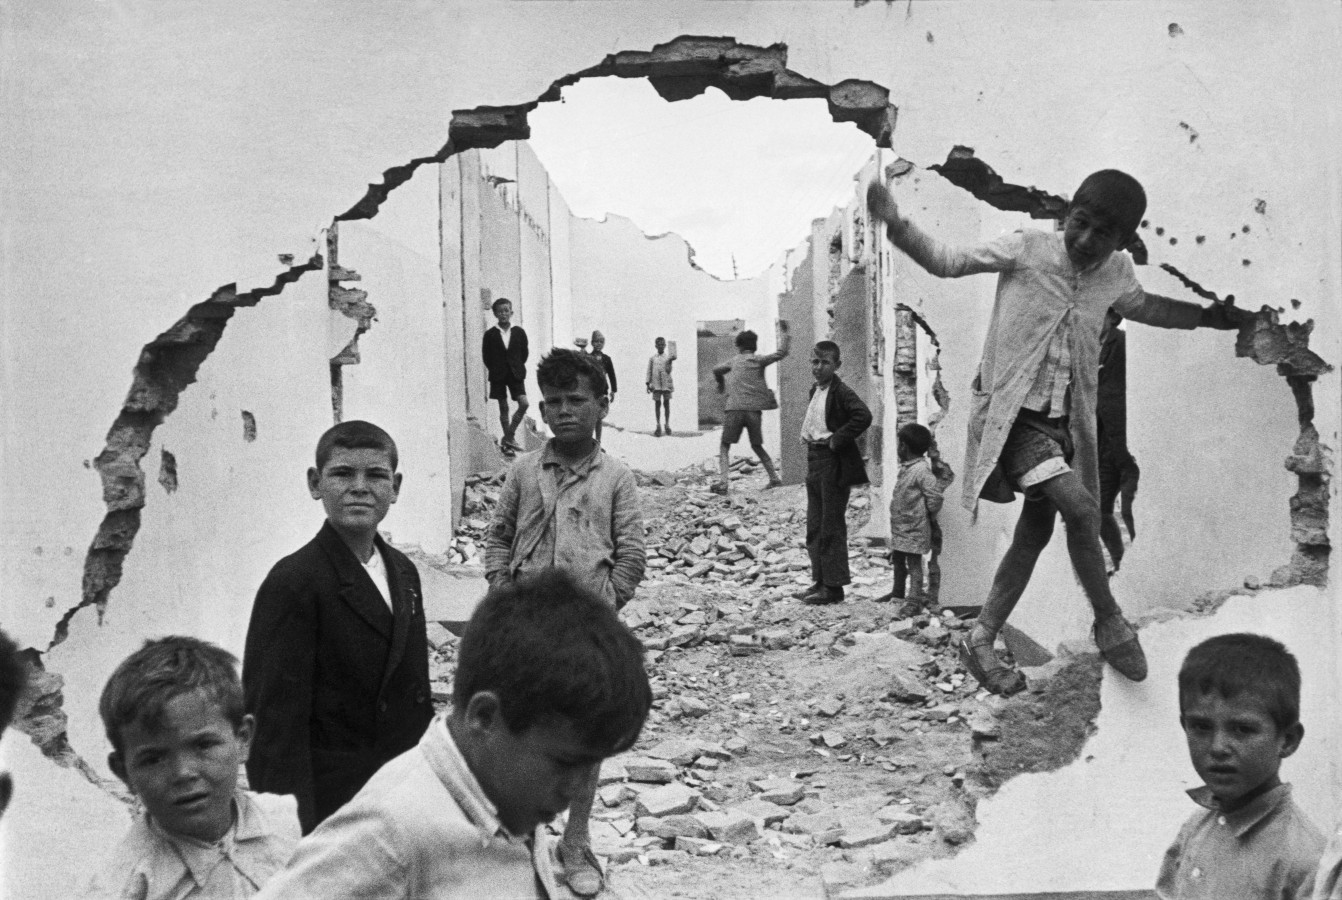 http://iconicphotos.files.wordpress.com/2013/09/cartier-bresson-seville-spain-1944-wall-hole-children-playing.jpg